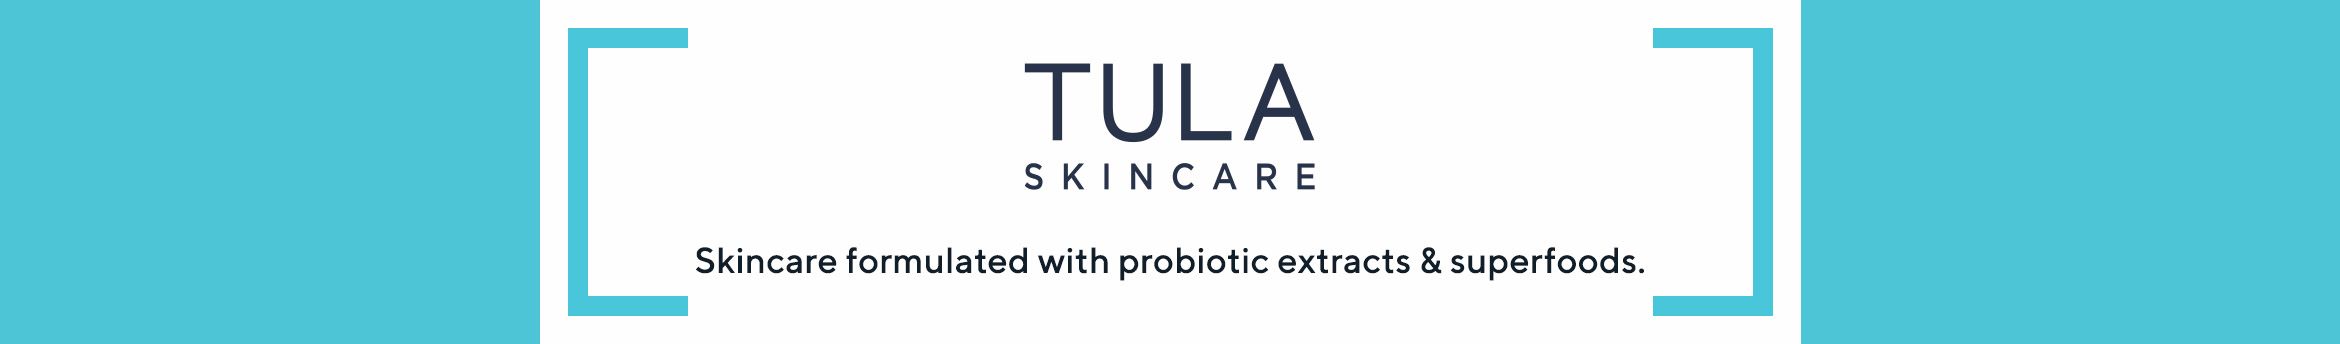 TULA - Skincare formulated with probiotic extracts & superfoods.